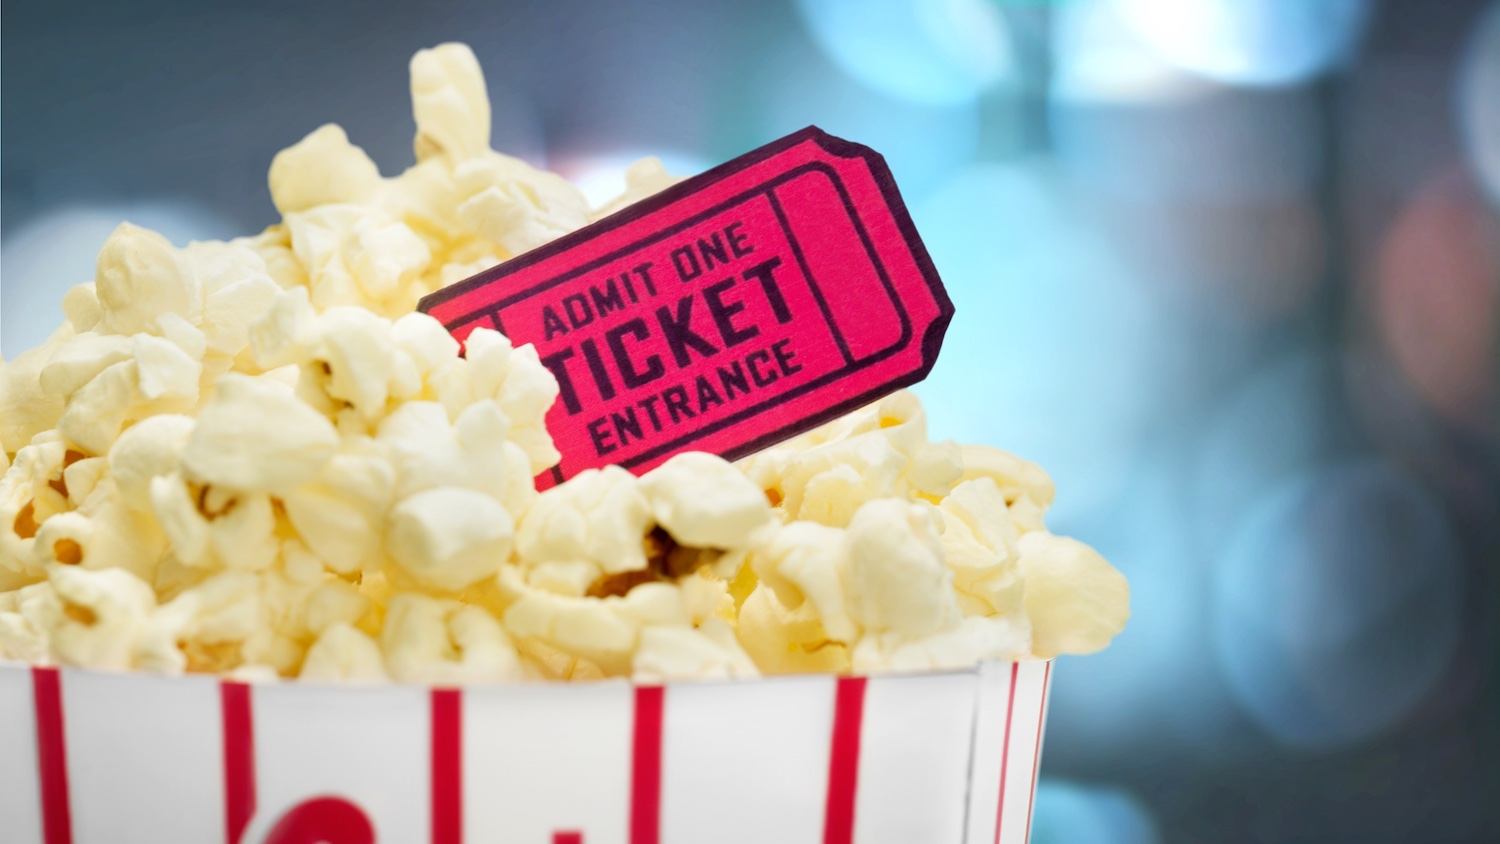 Expensive movie tickets: A price to pay?